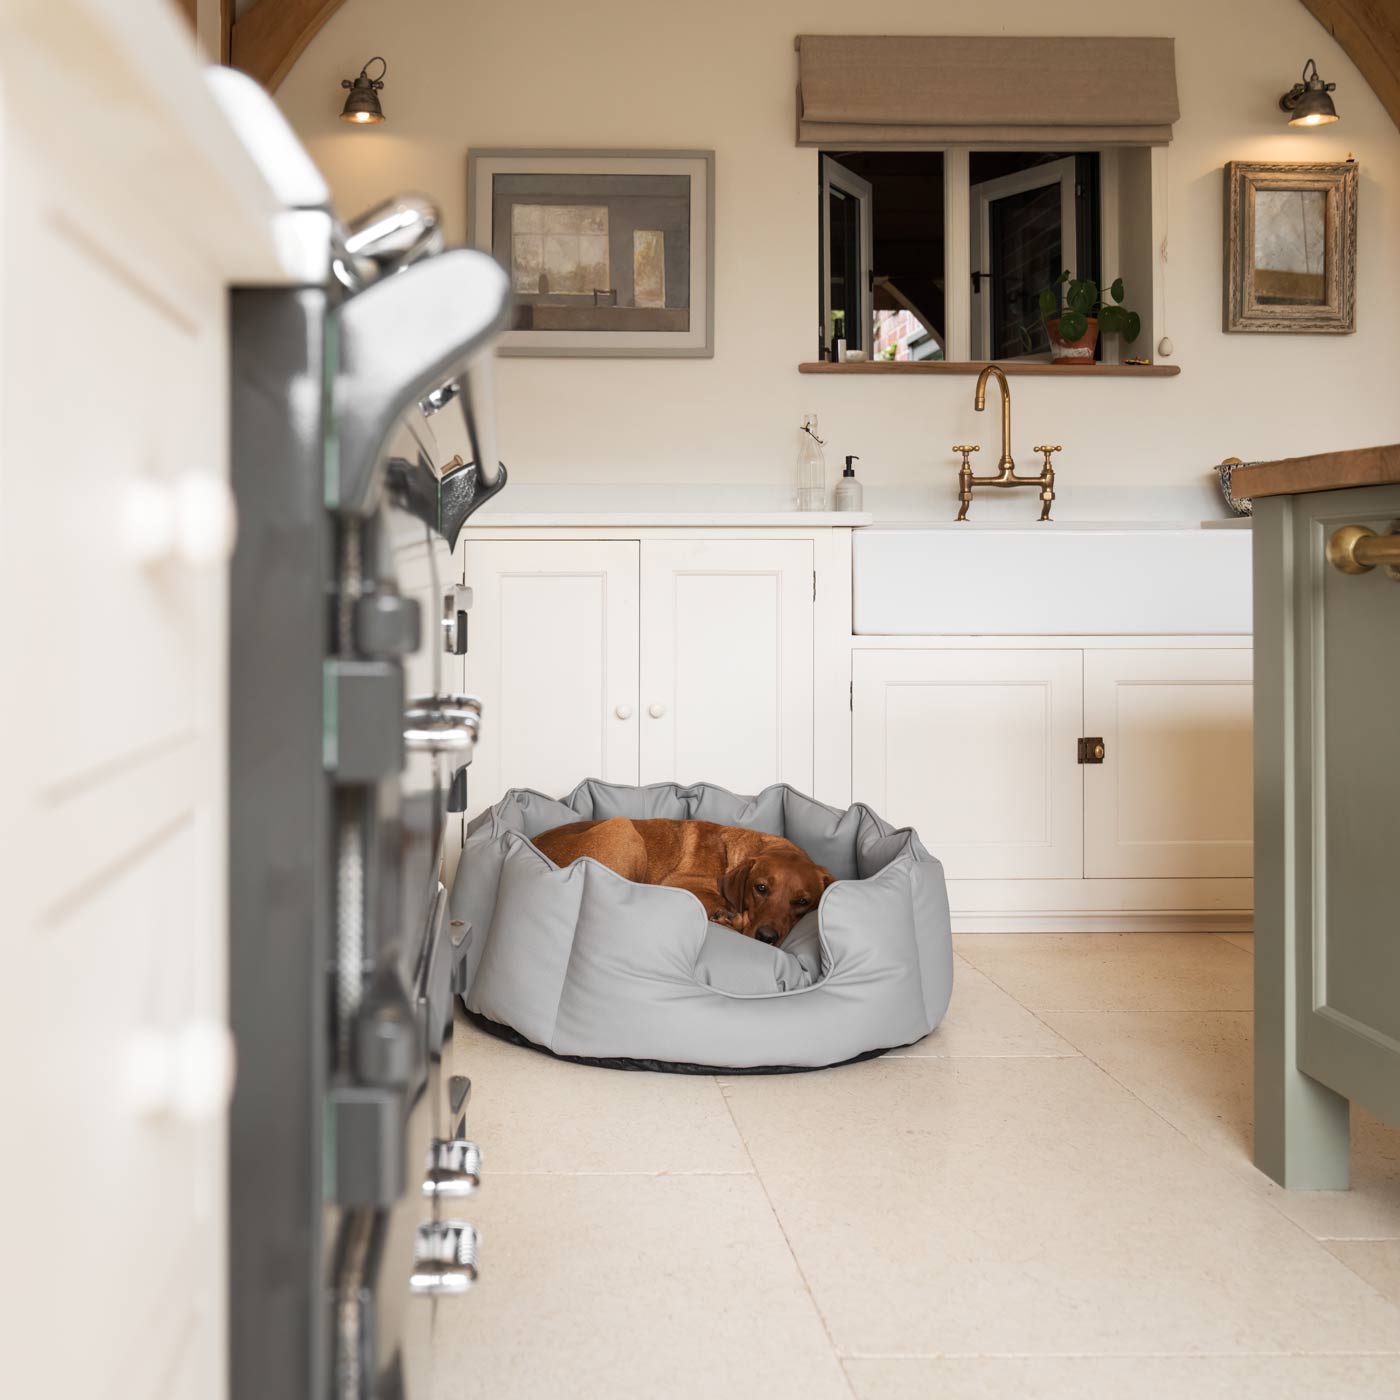 Luxury Handmade High Wall in Rhino Tough Faux Leather, in Granite, Perfect For Your Pets Nap Time! Available To Personalise at Lords & Labradors